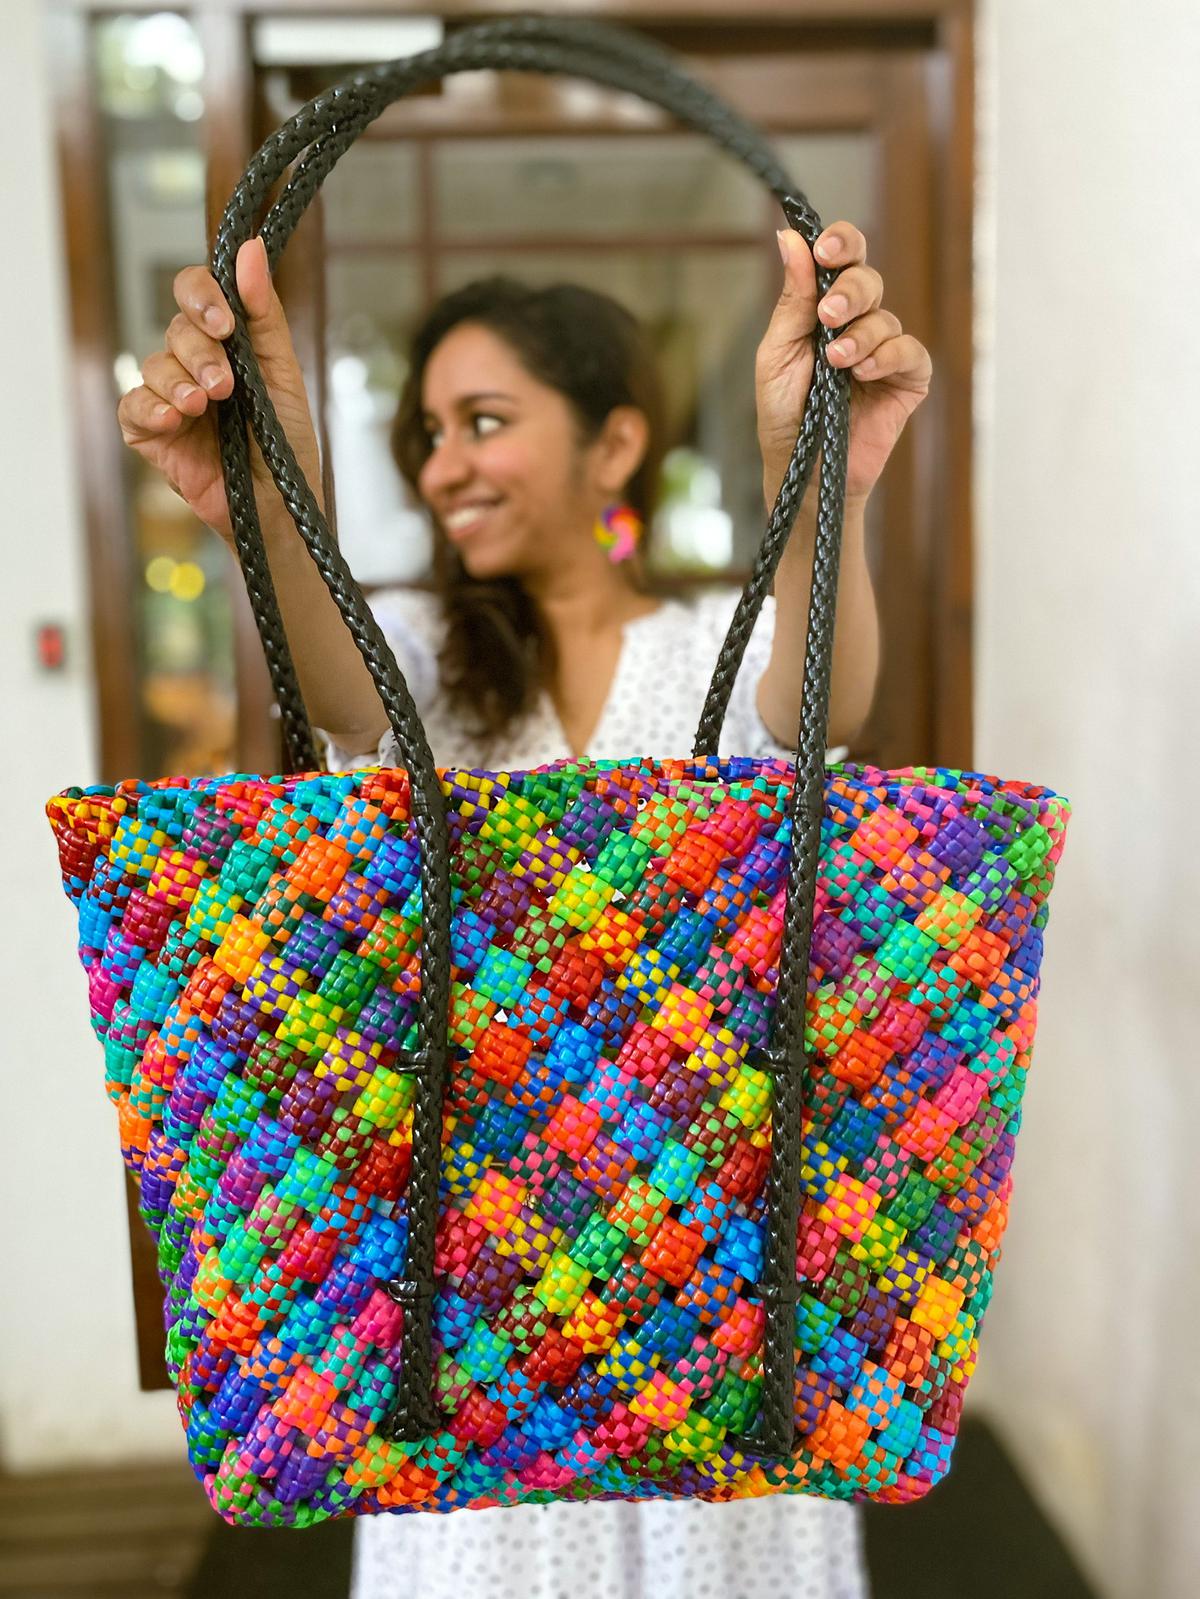 Plastic knot koodais are now chic handbags and clutches  The Hindu